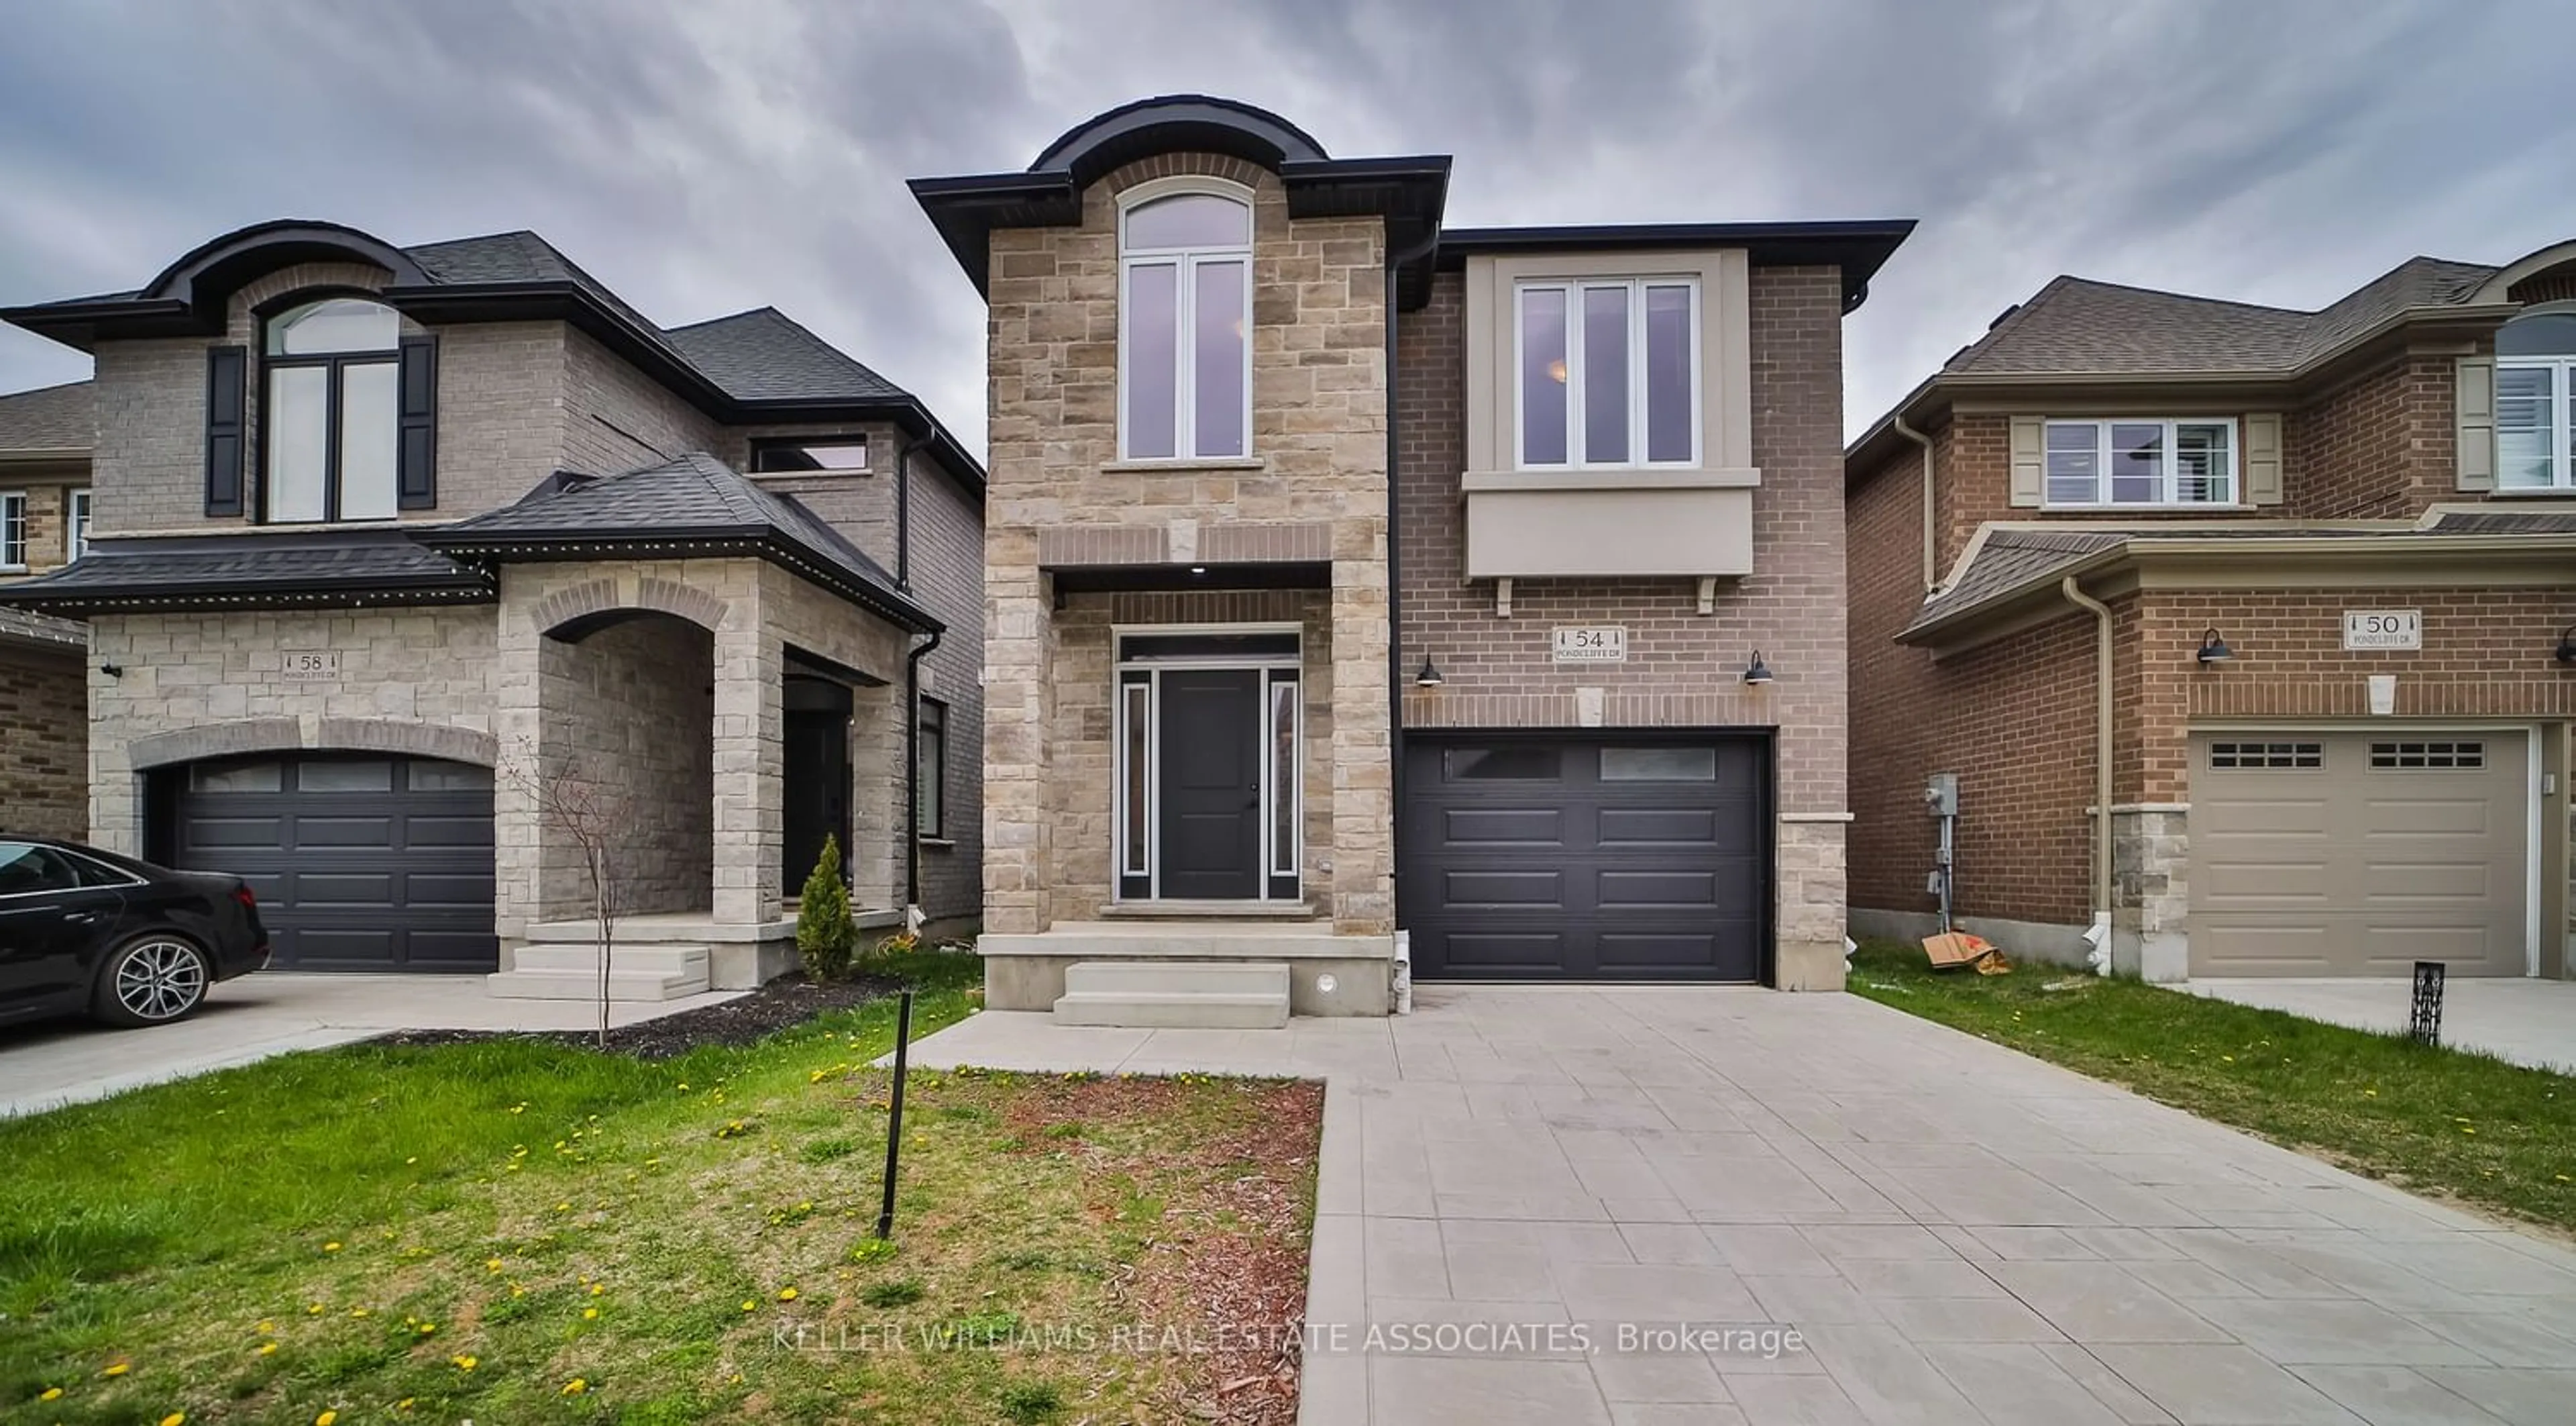 Home with brick exterior material for 54 Pondcliffe Dr, Kitchener Ontario N2R 0M3